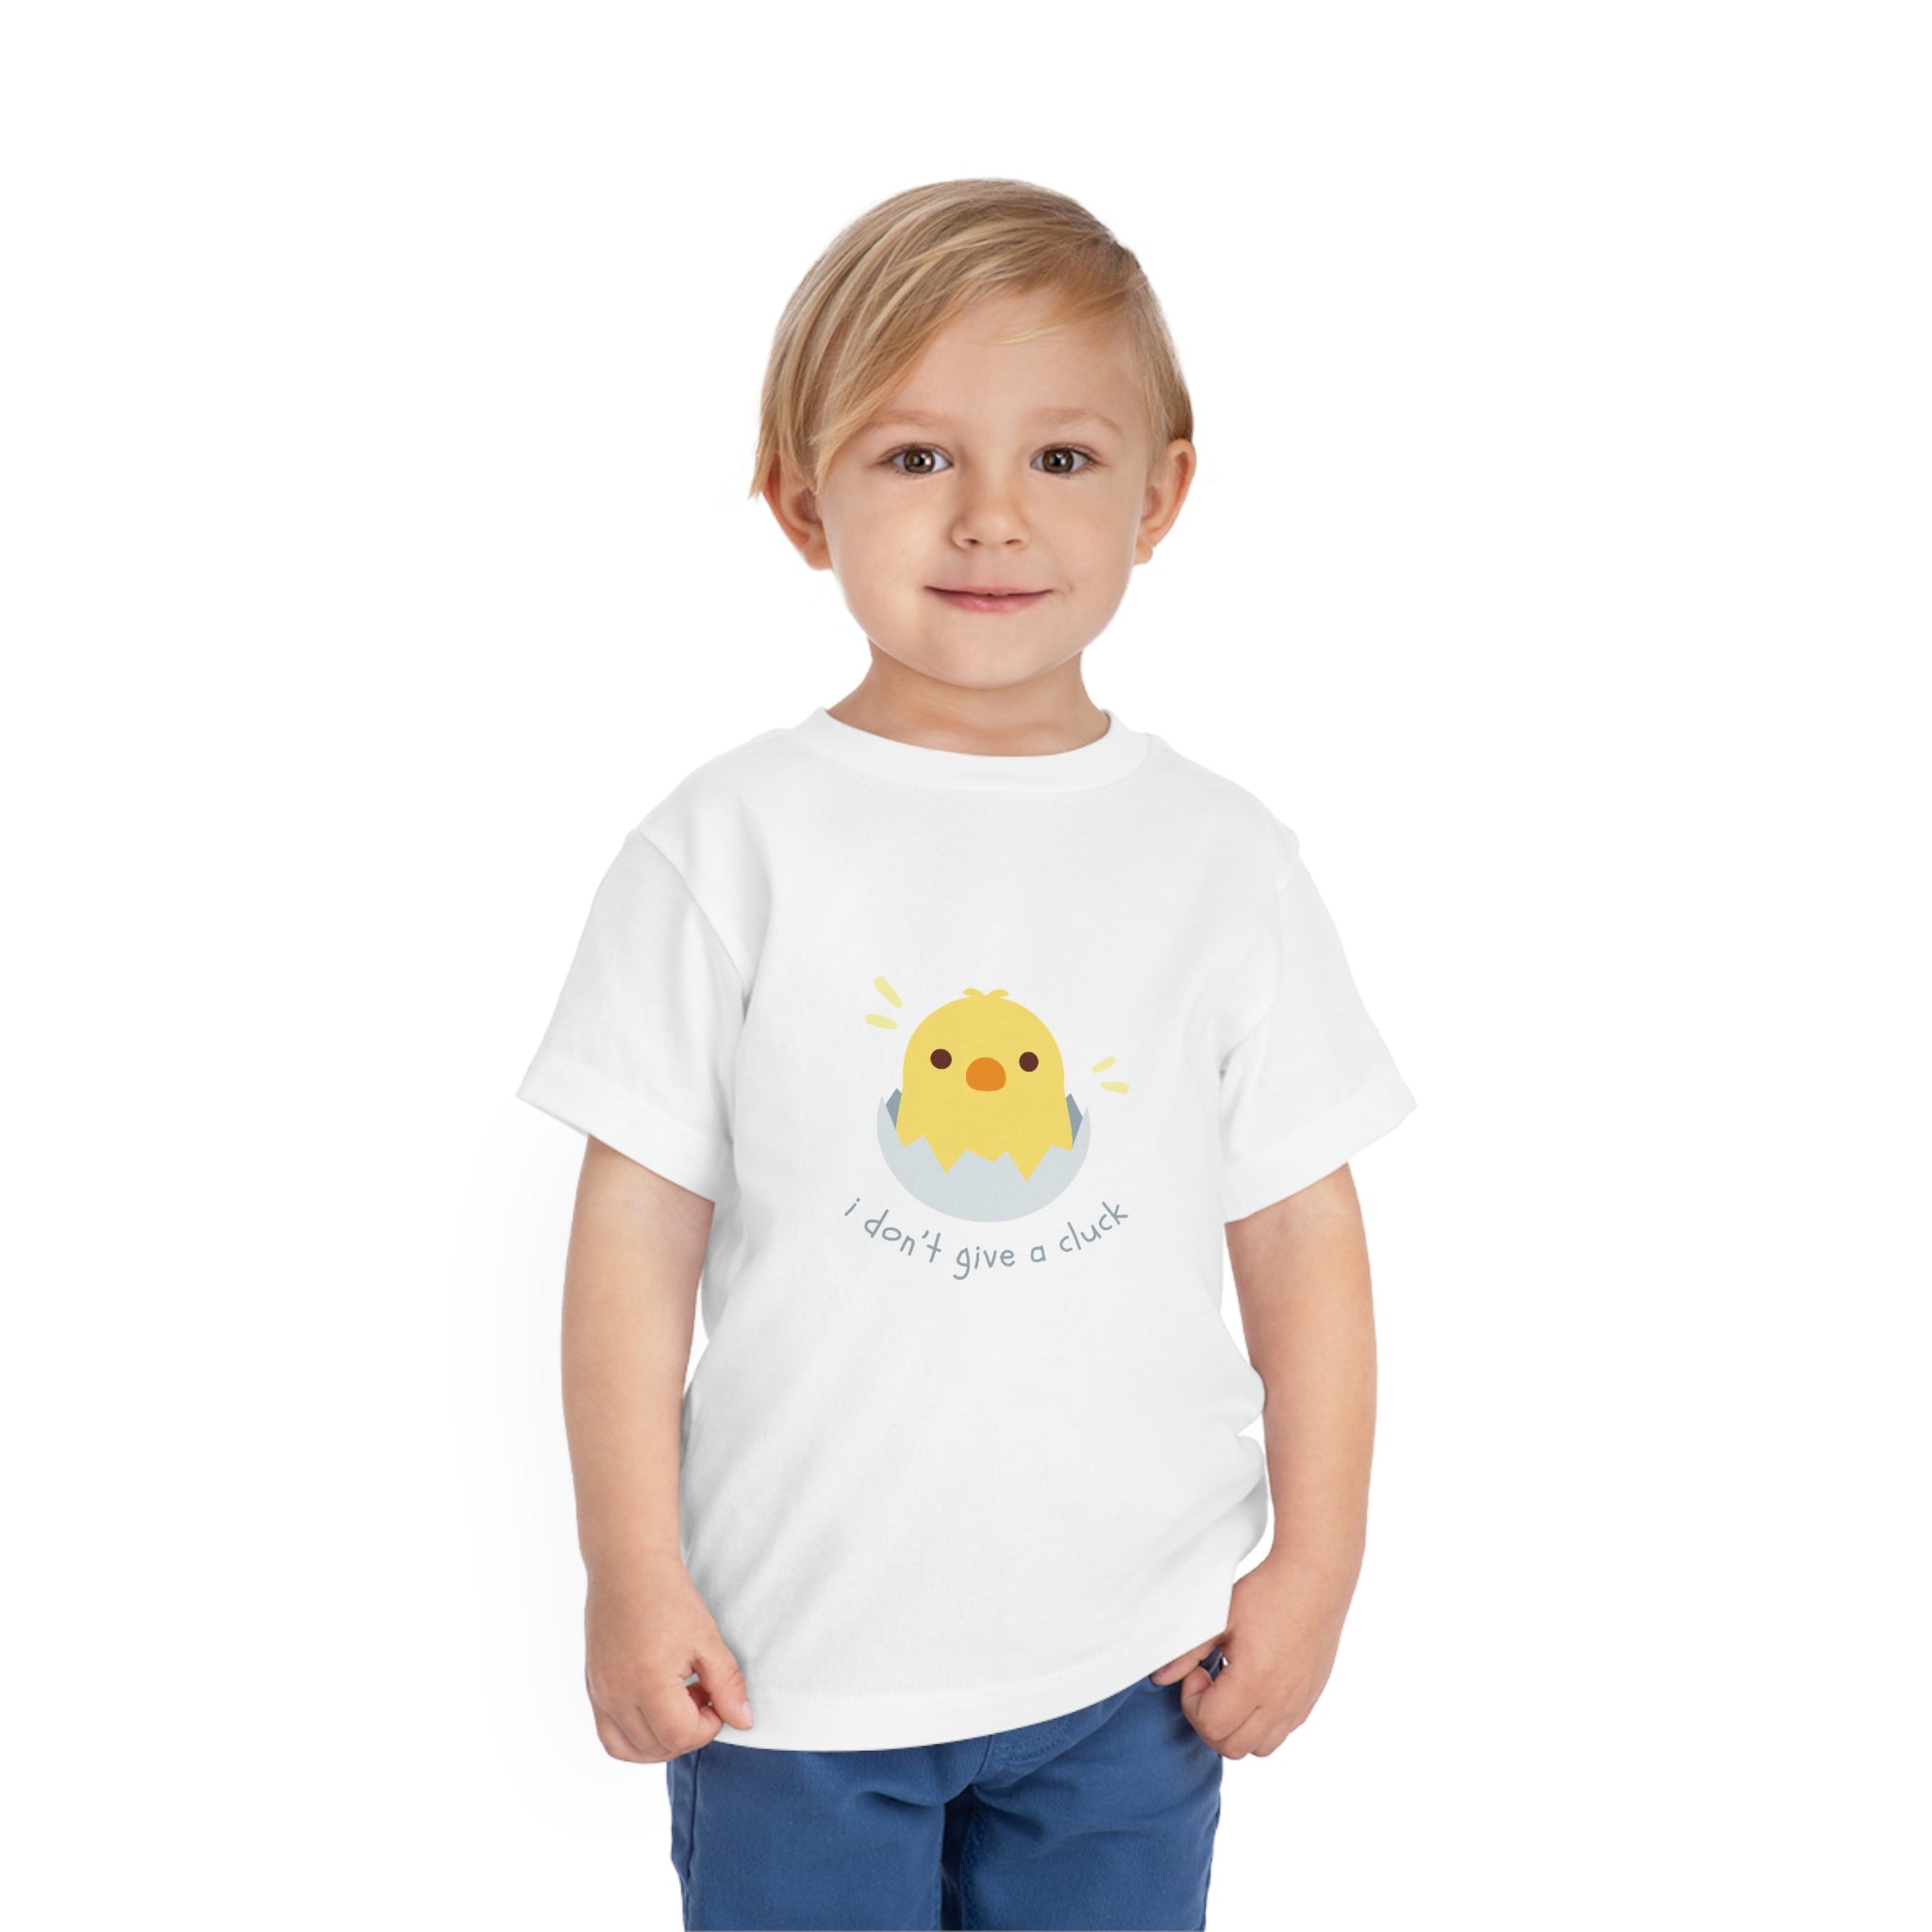 I Don’t Give a Cluck Toddler Short Sleeve Tee